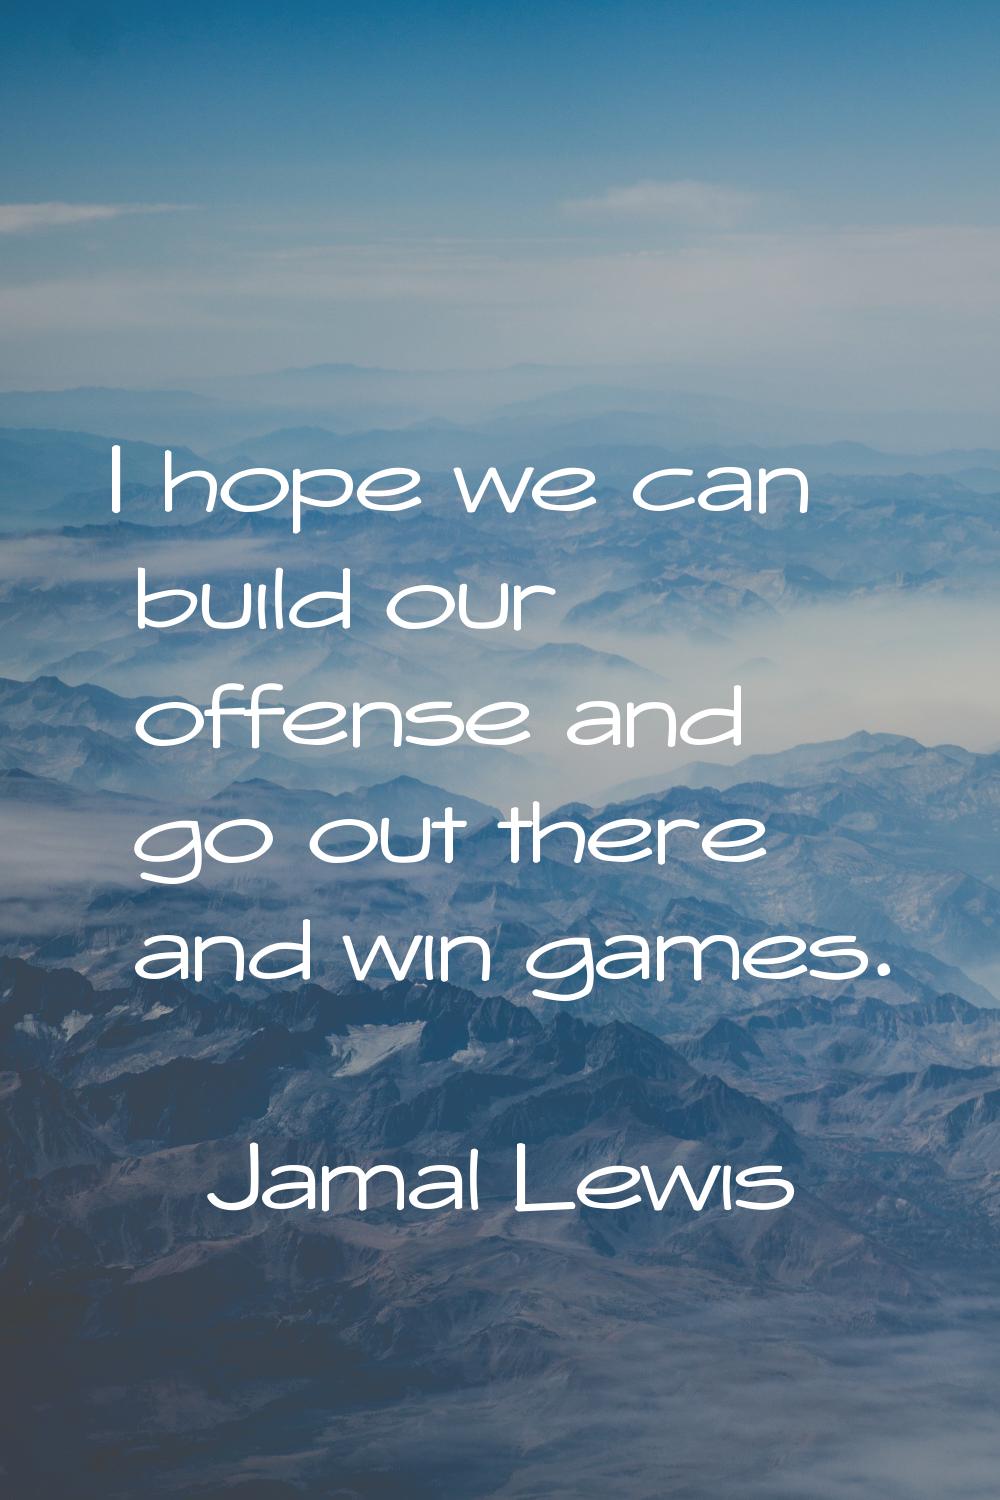 I hope we can build our offense and go out there and win games.